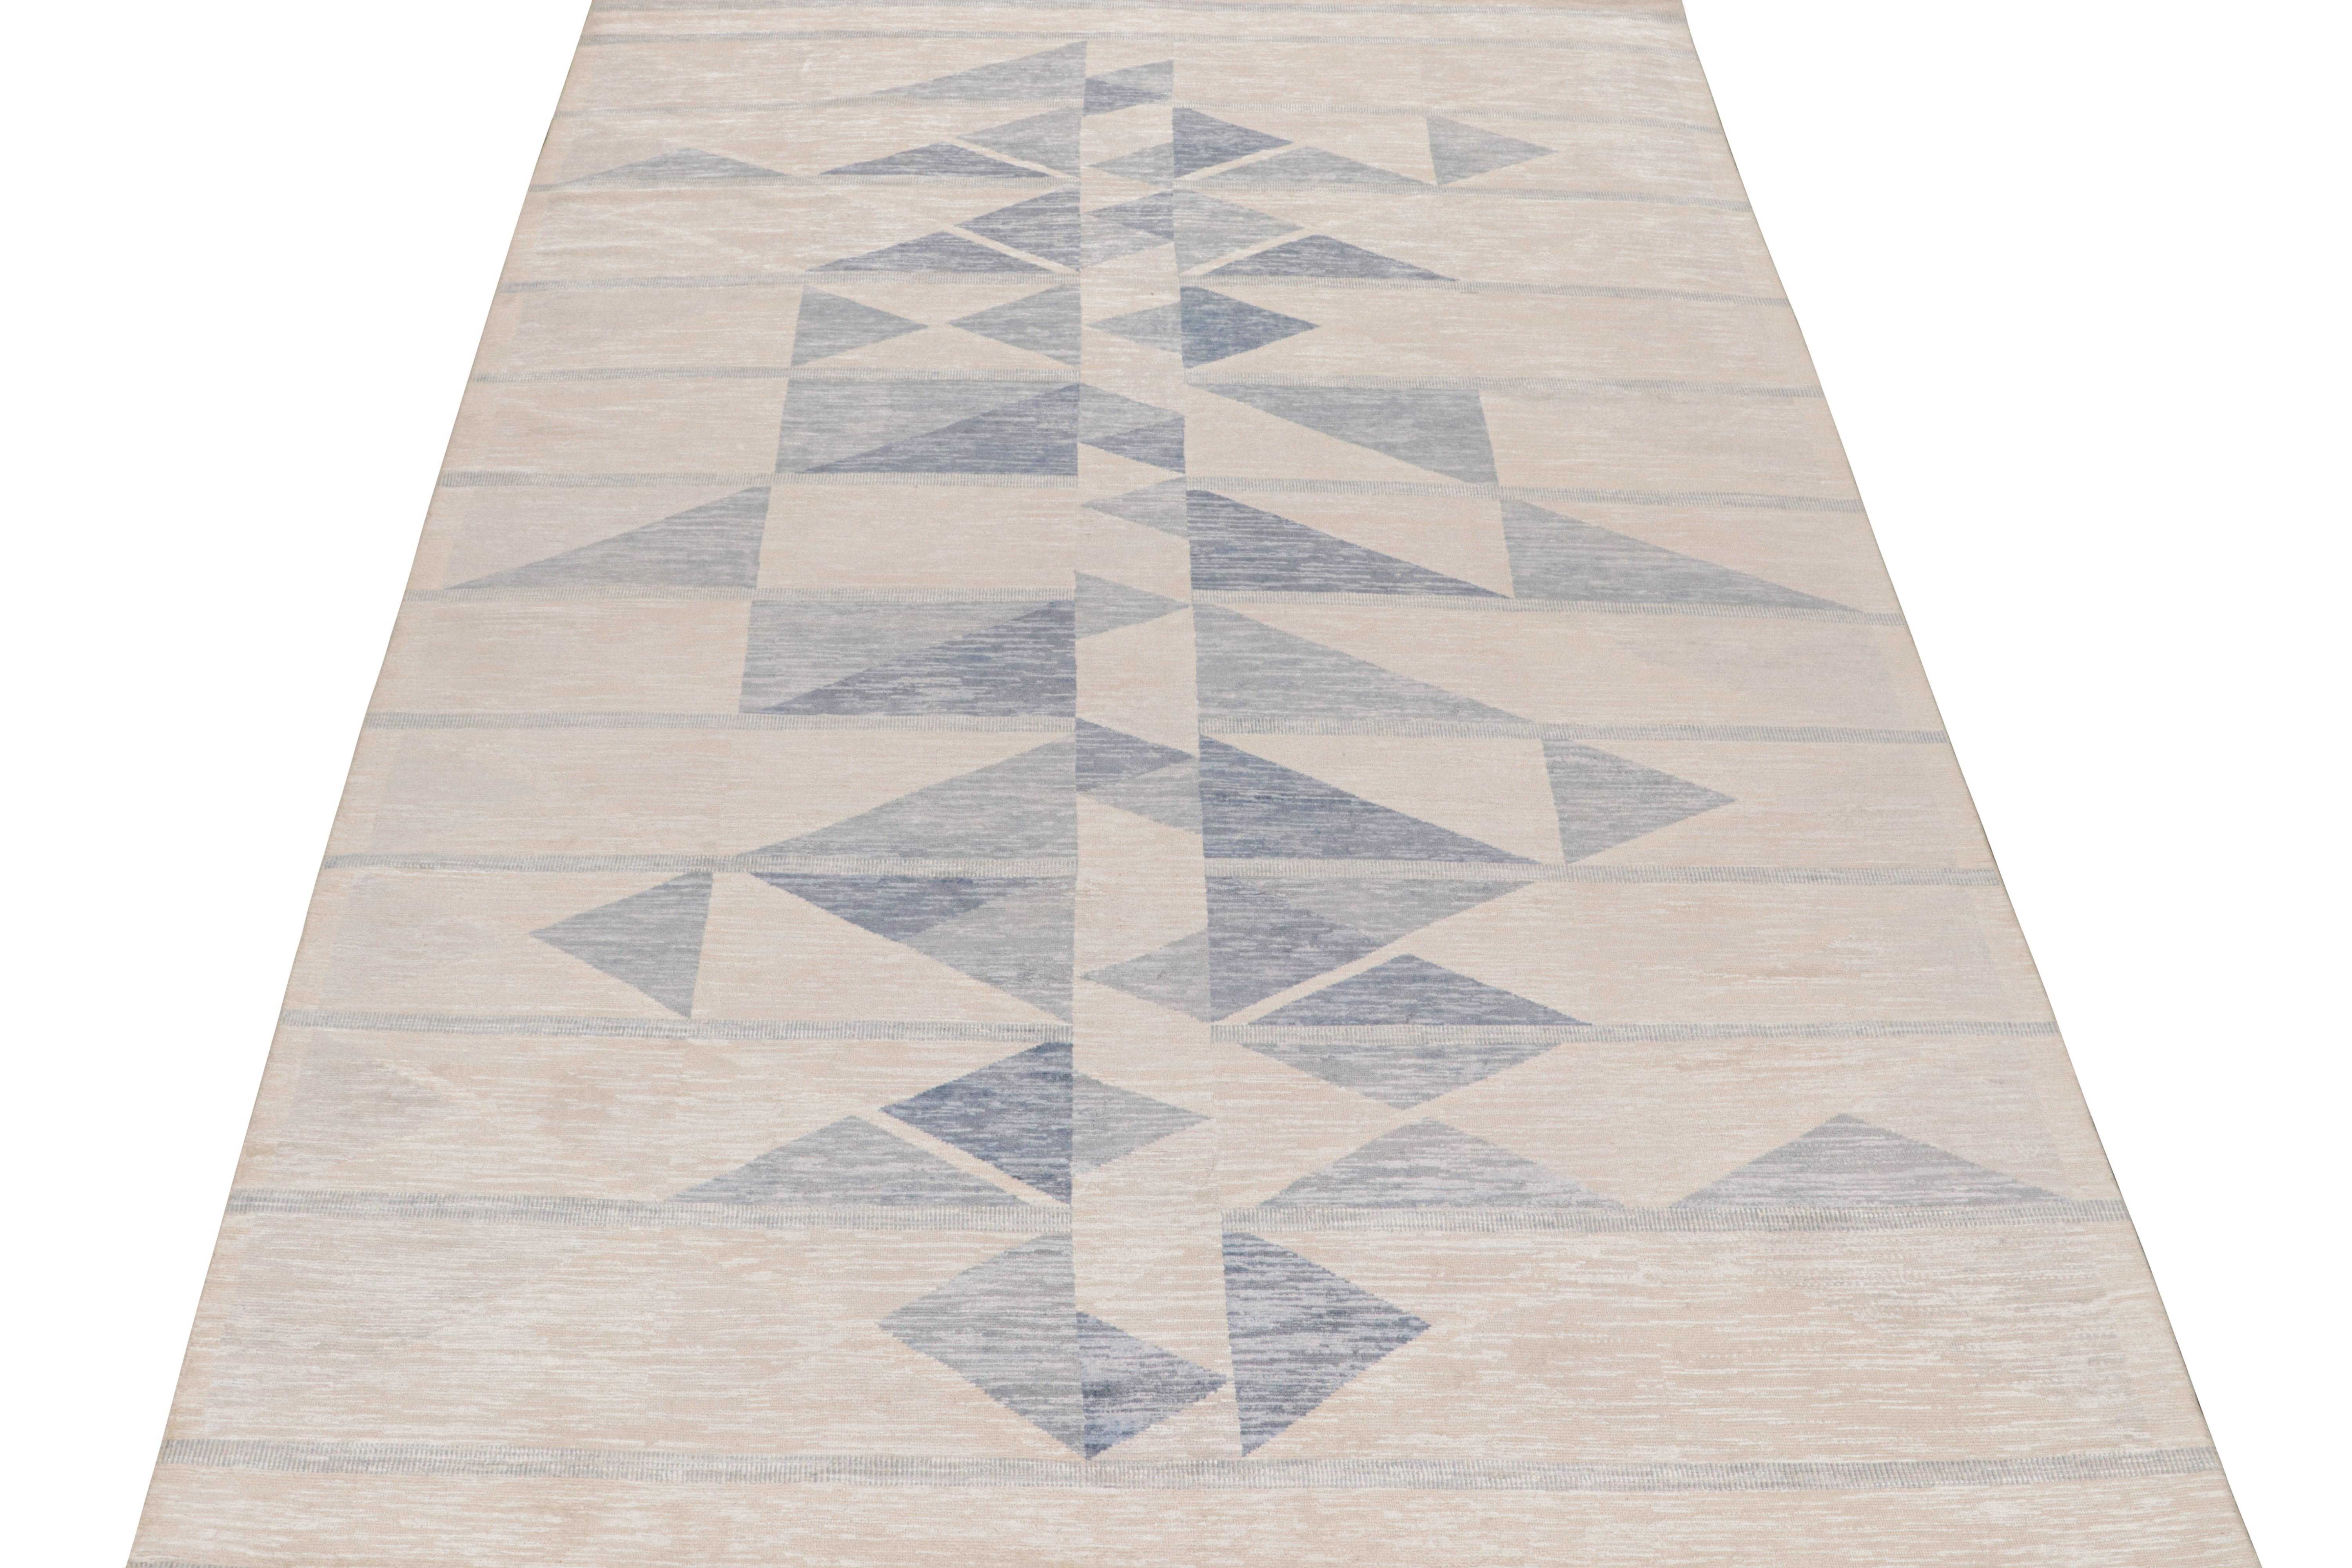 Indian Rug & Kilim’s Scandinavian-Style Rug with Ivory & Blue Geometric Patterns For Sale